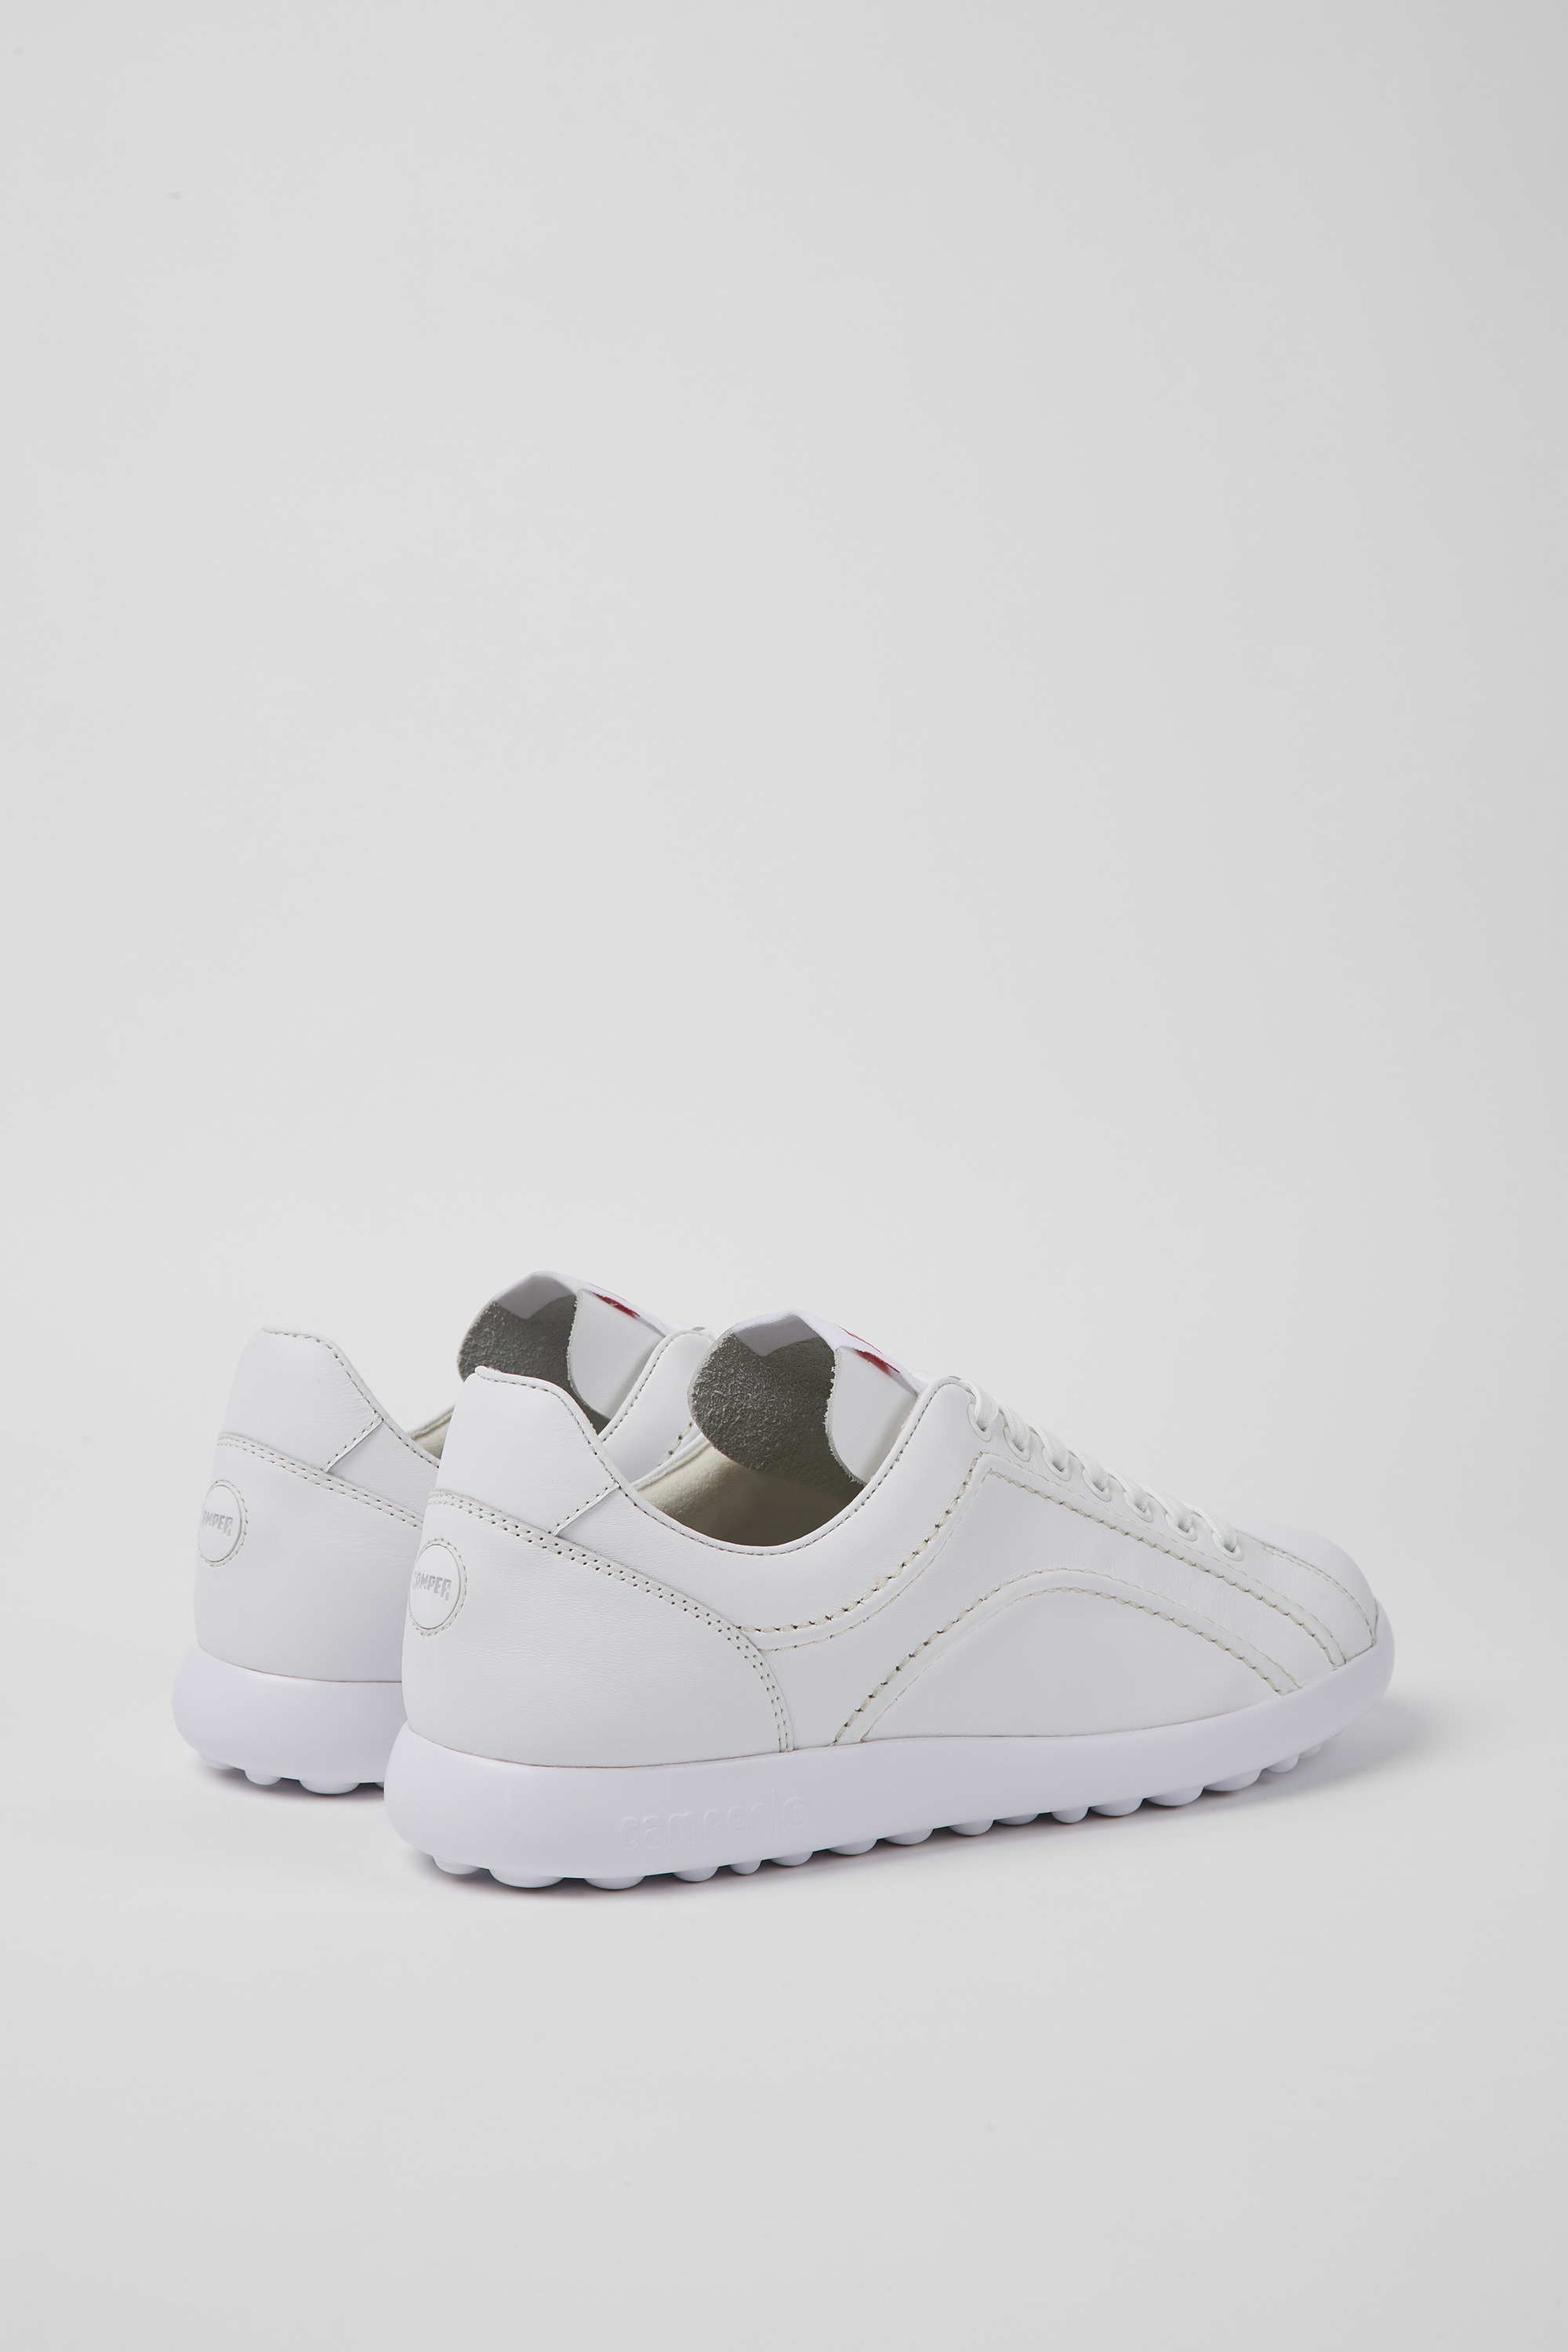 Pelotas White Sneakers for Men - Fall/Winter collection - Camper USA